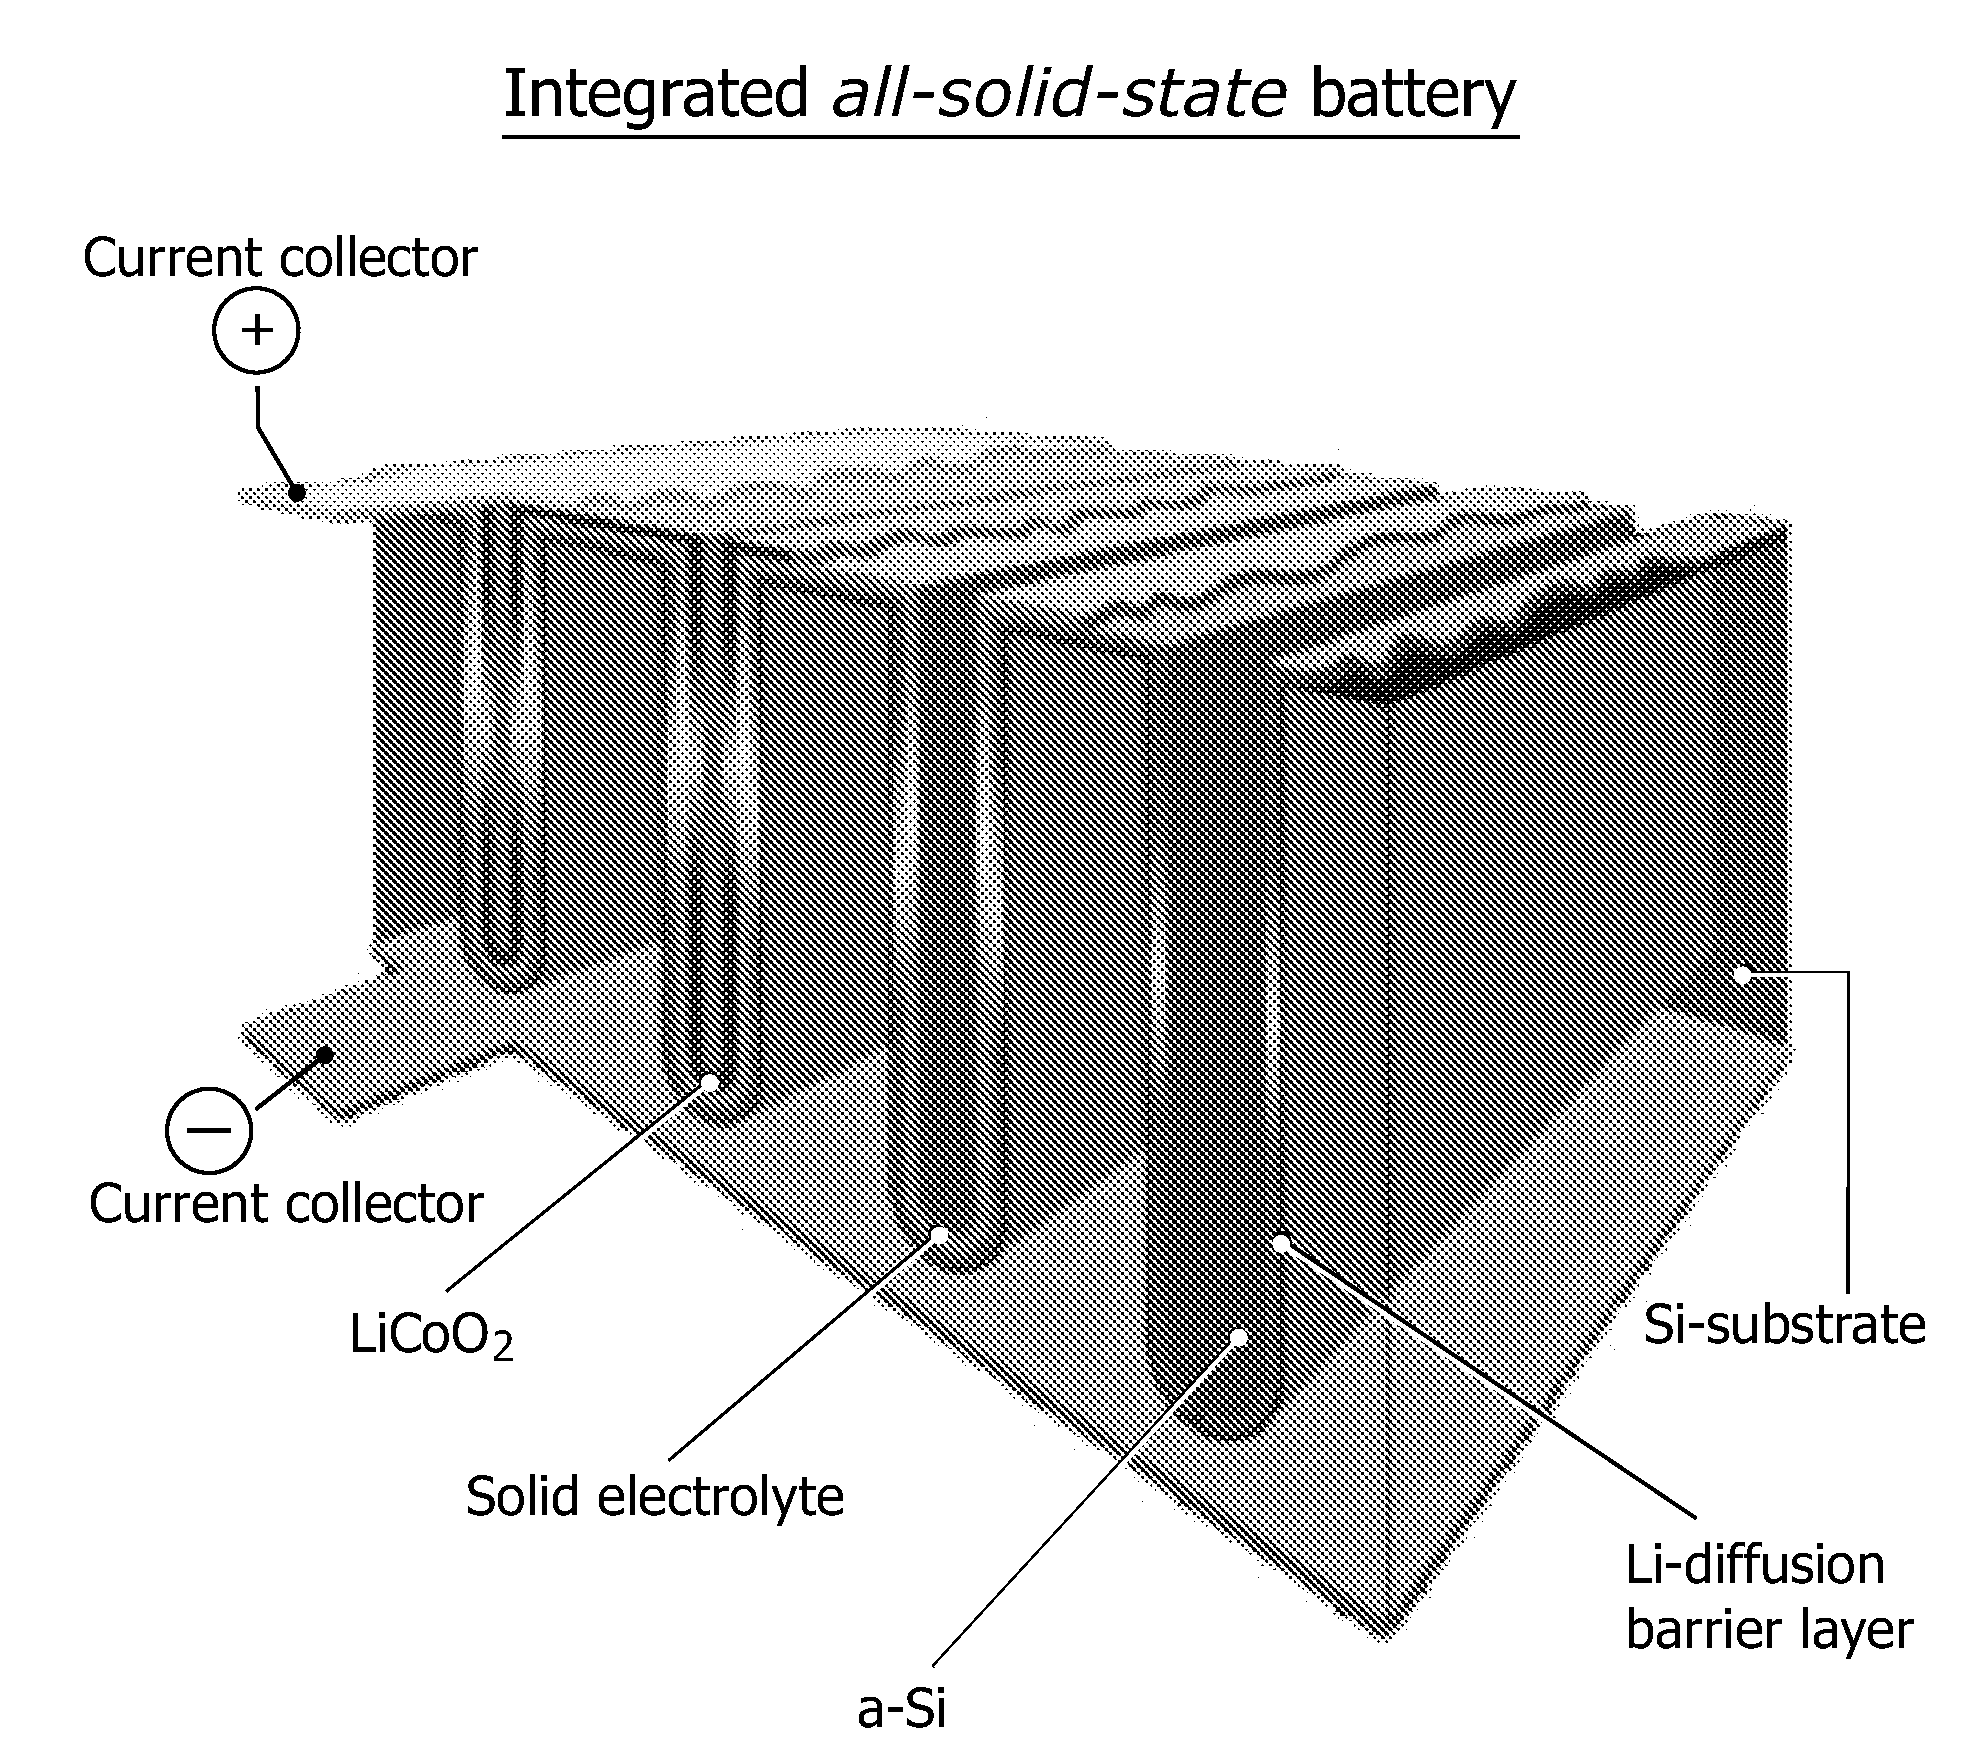 Solid-state structure comprising a battery and a variable capacitor having a capacitance which is controlled by the state-of-charge of the battery